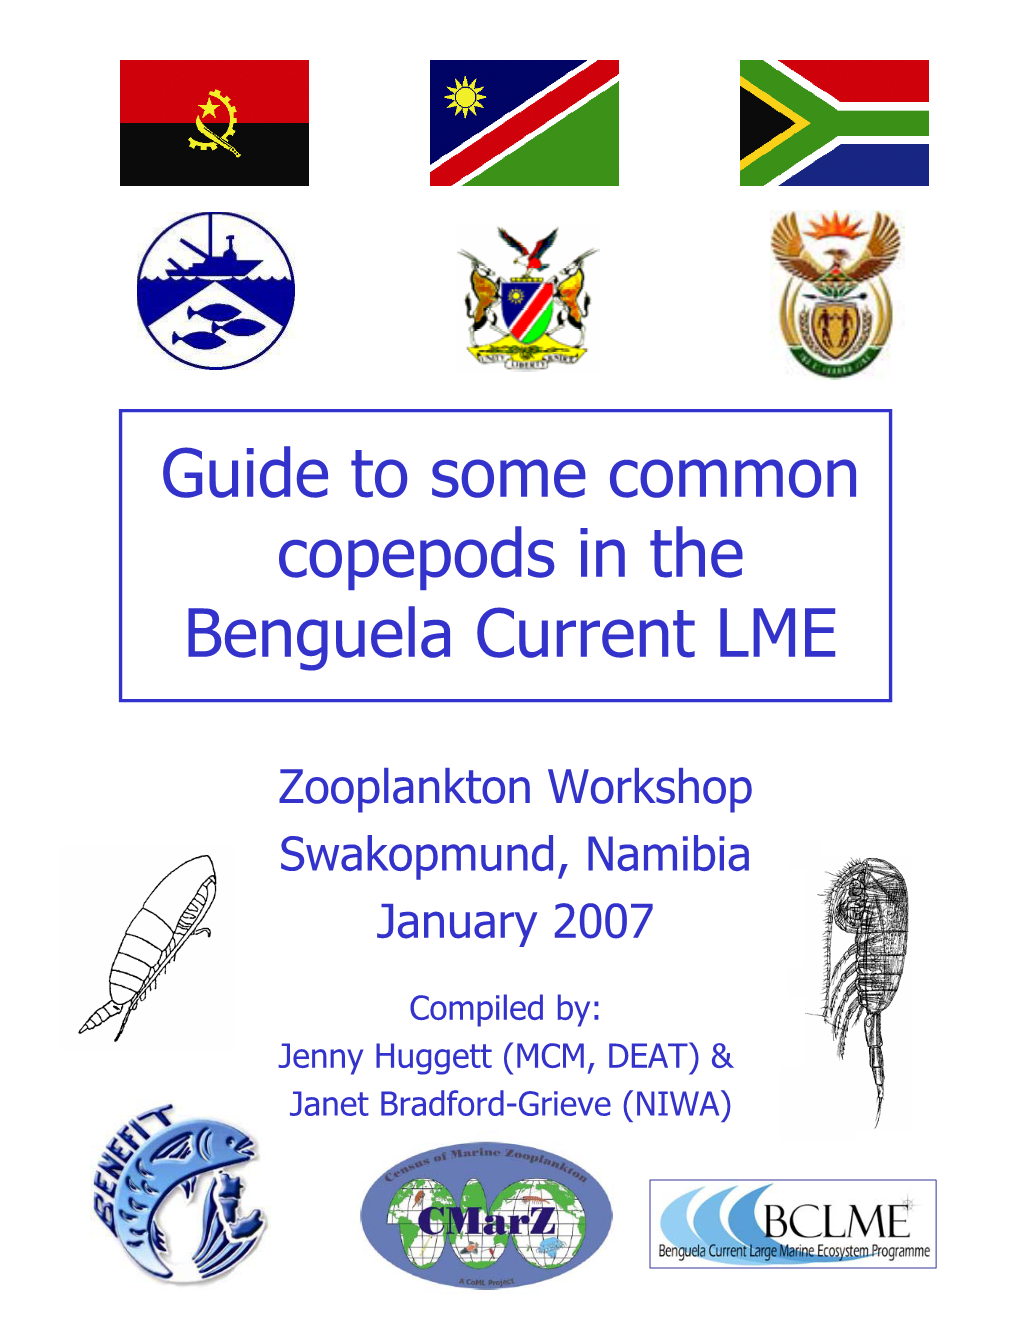 Guide to Some Common Copepods in the Benguela Current LME.Pdf